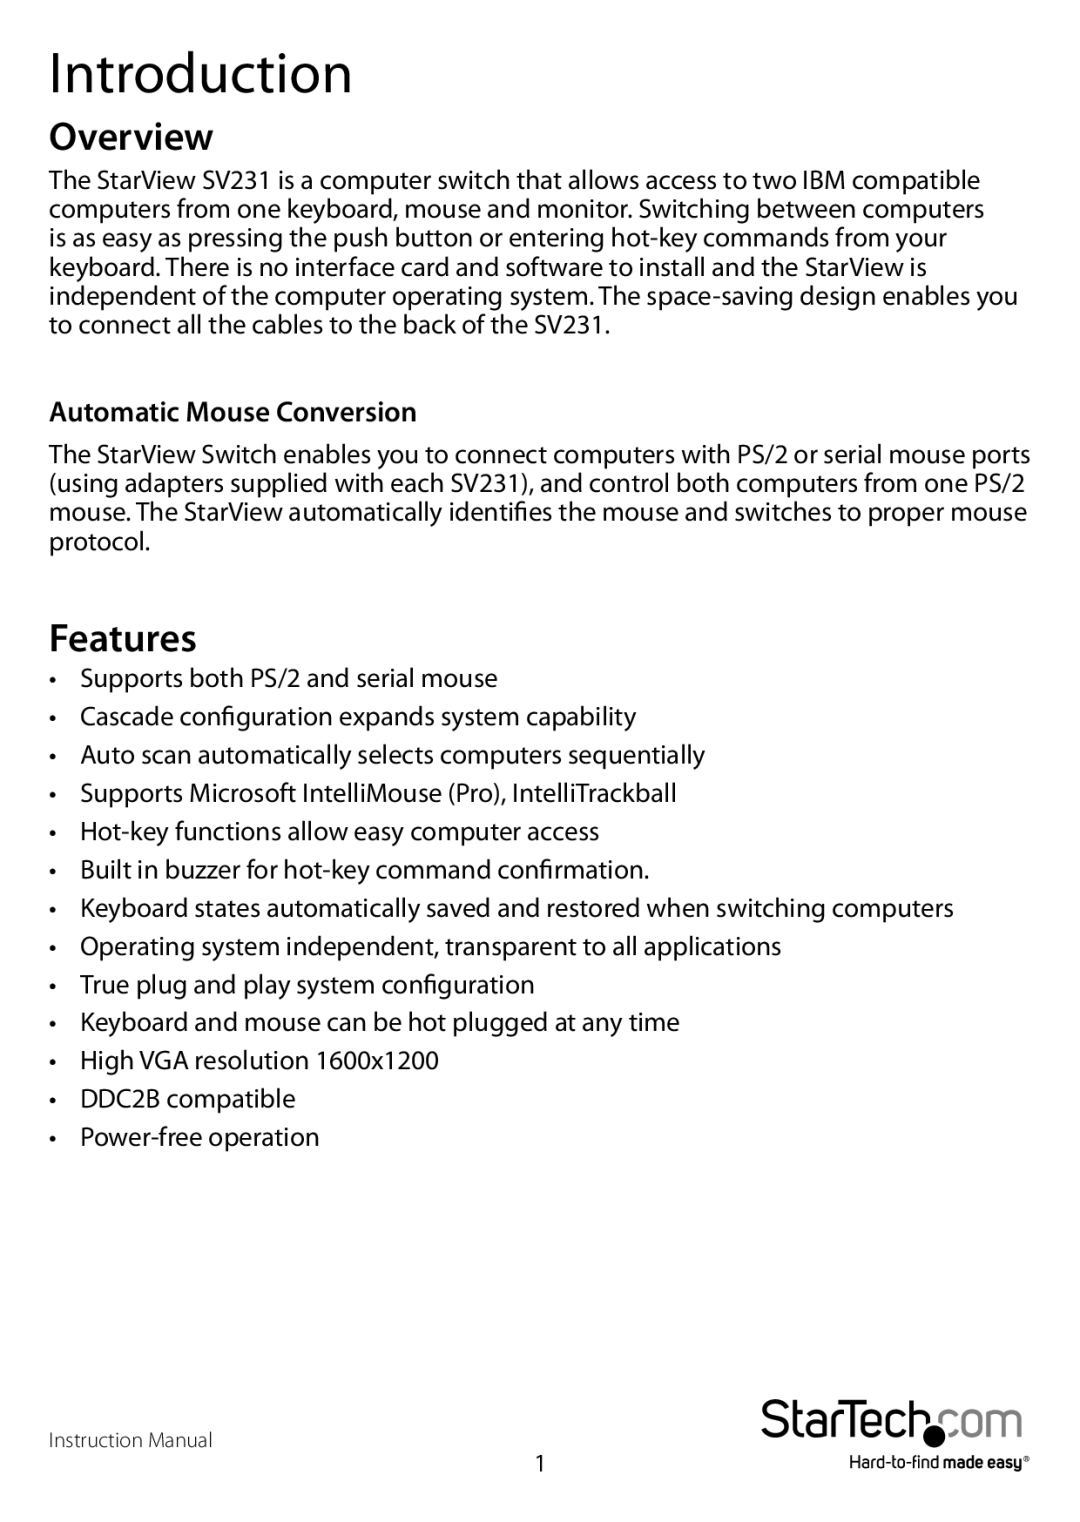 StarTech.com Sv231 manual Introduction, Overview, Features, Automatic Mouse Conversion 